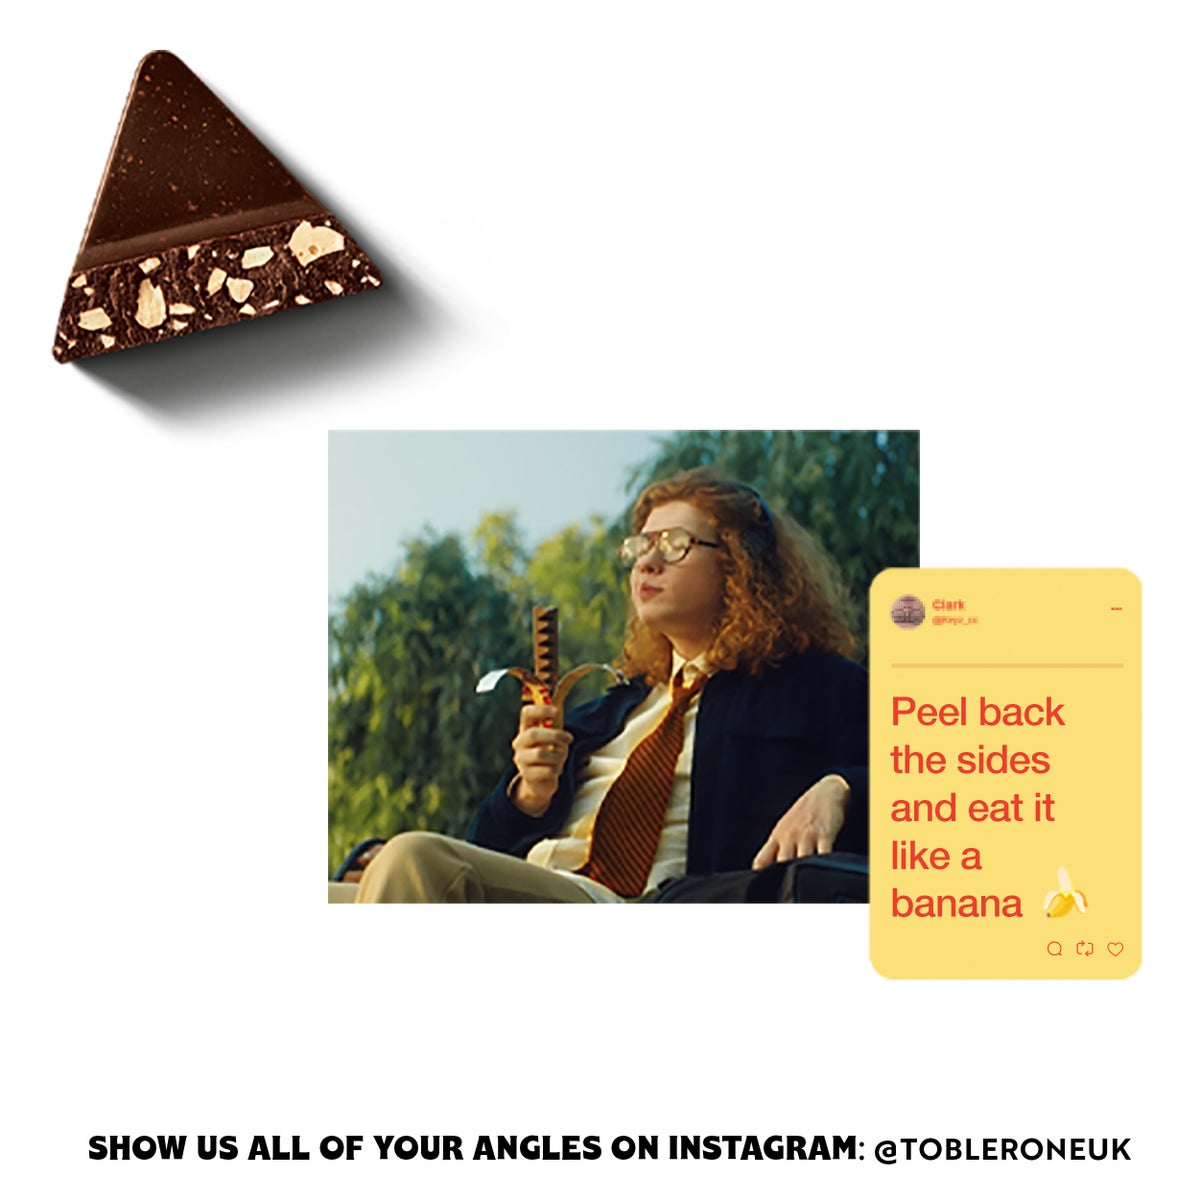 Peel back the sides and eat it like a banana. Show us all of your anges on instagram: @TOBLERONEUK